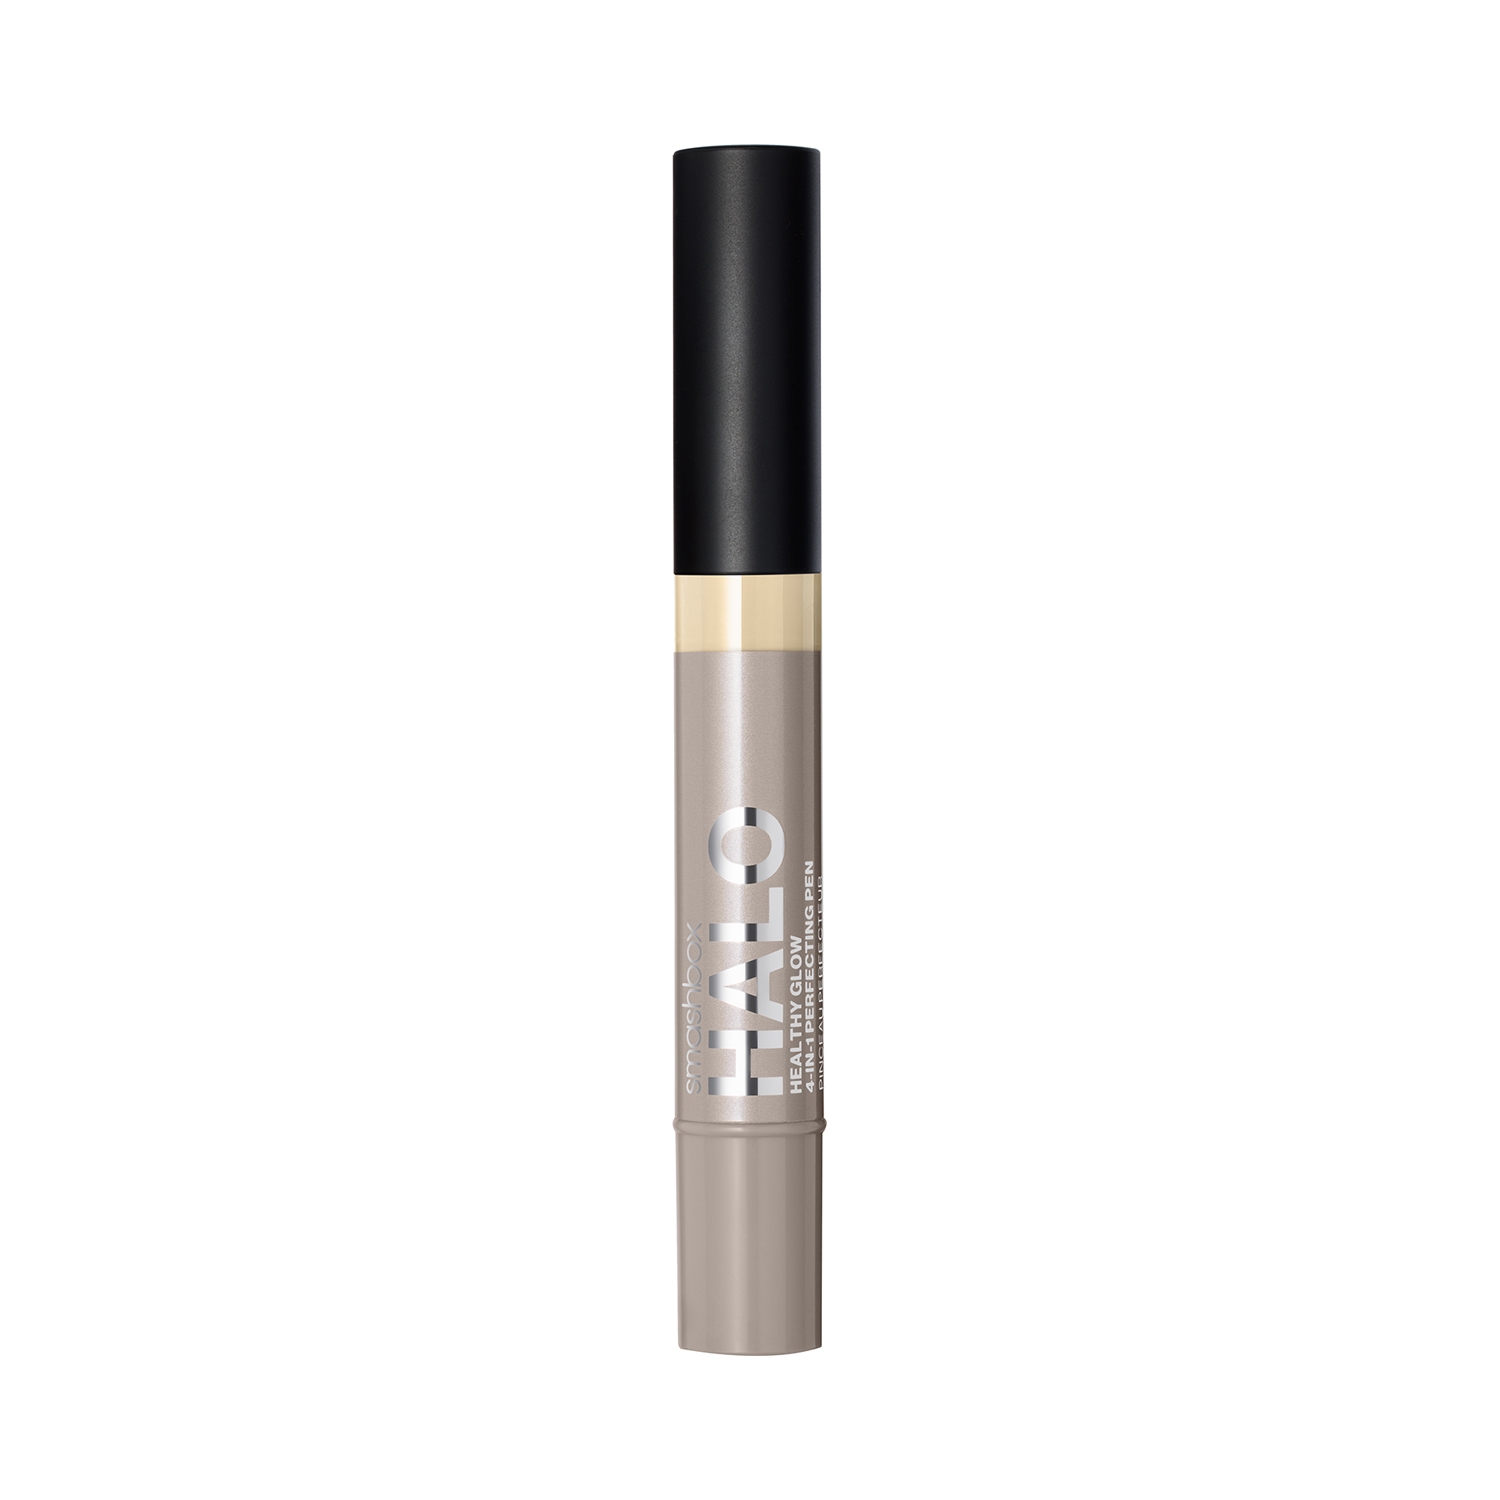 Smashbox | Smashbox Halo Healthy Glow 4-In-1 Perfecting Concealer Pen - F10W (3.5ml)